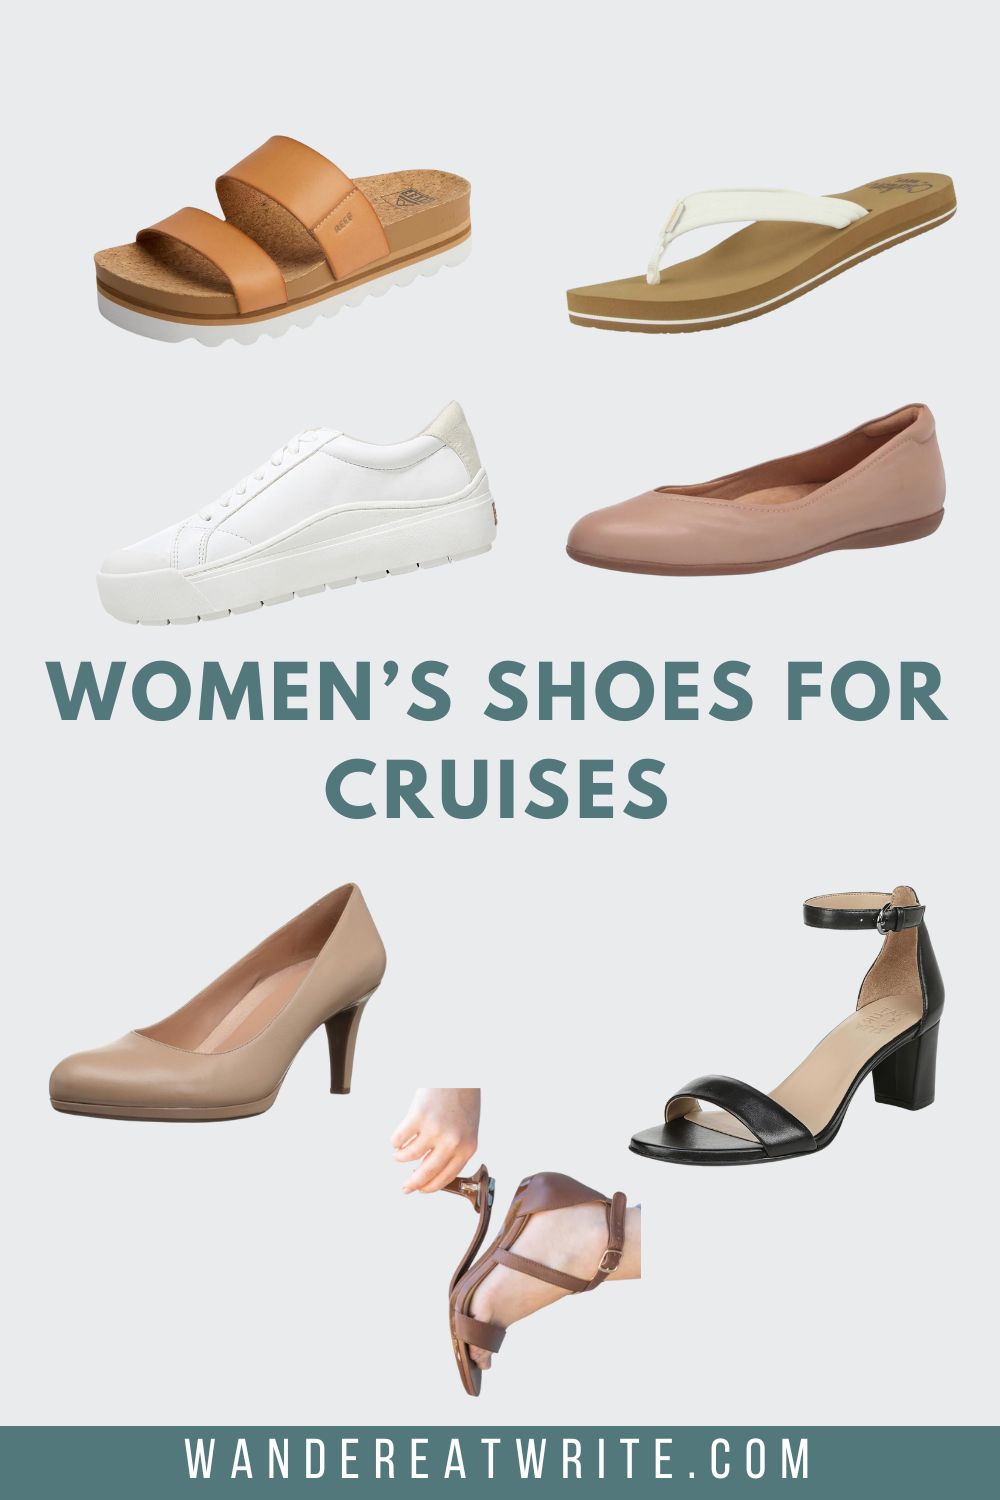 Women's shoes for cruises. Top row photos: tan sandals, flip flop with white strap. Second top row: white sneakers, light pink ballet flat. Bottom photos: nude pump heel, brown convertible heel with person taking heel off, black sandal with heel